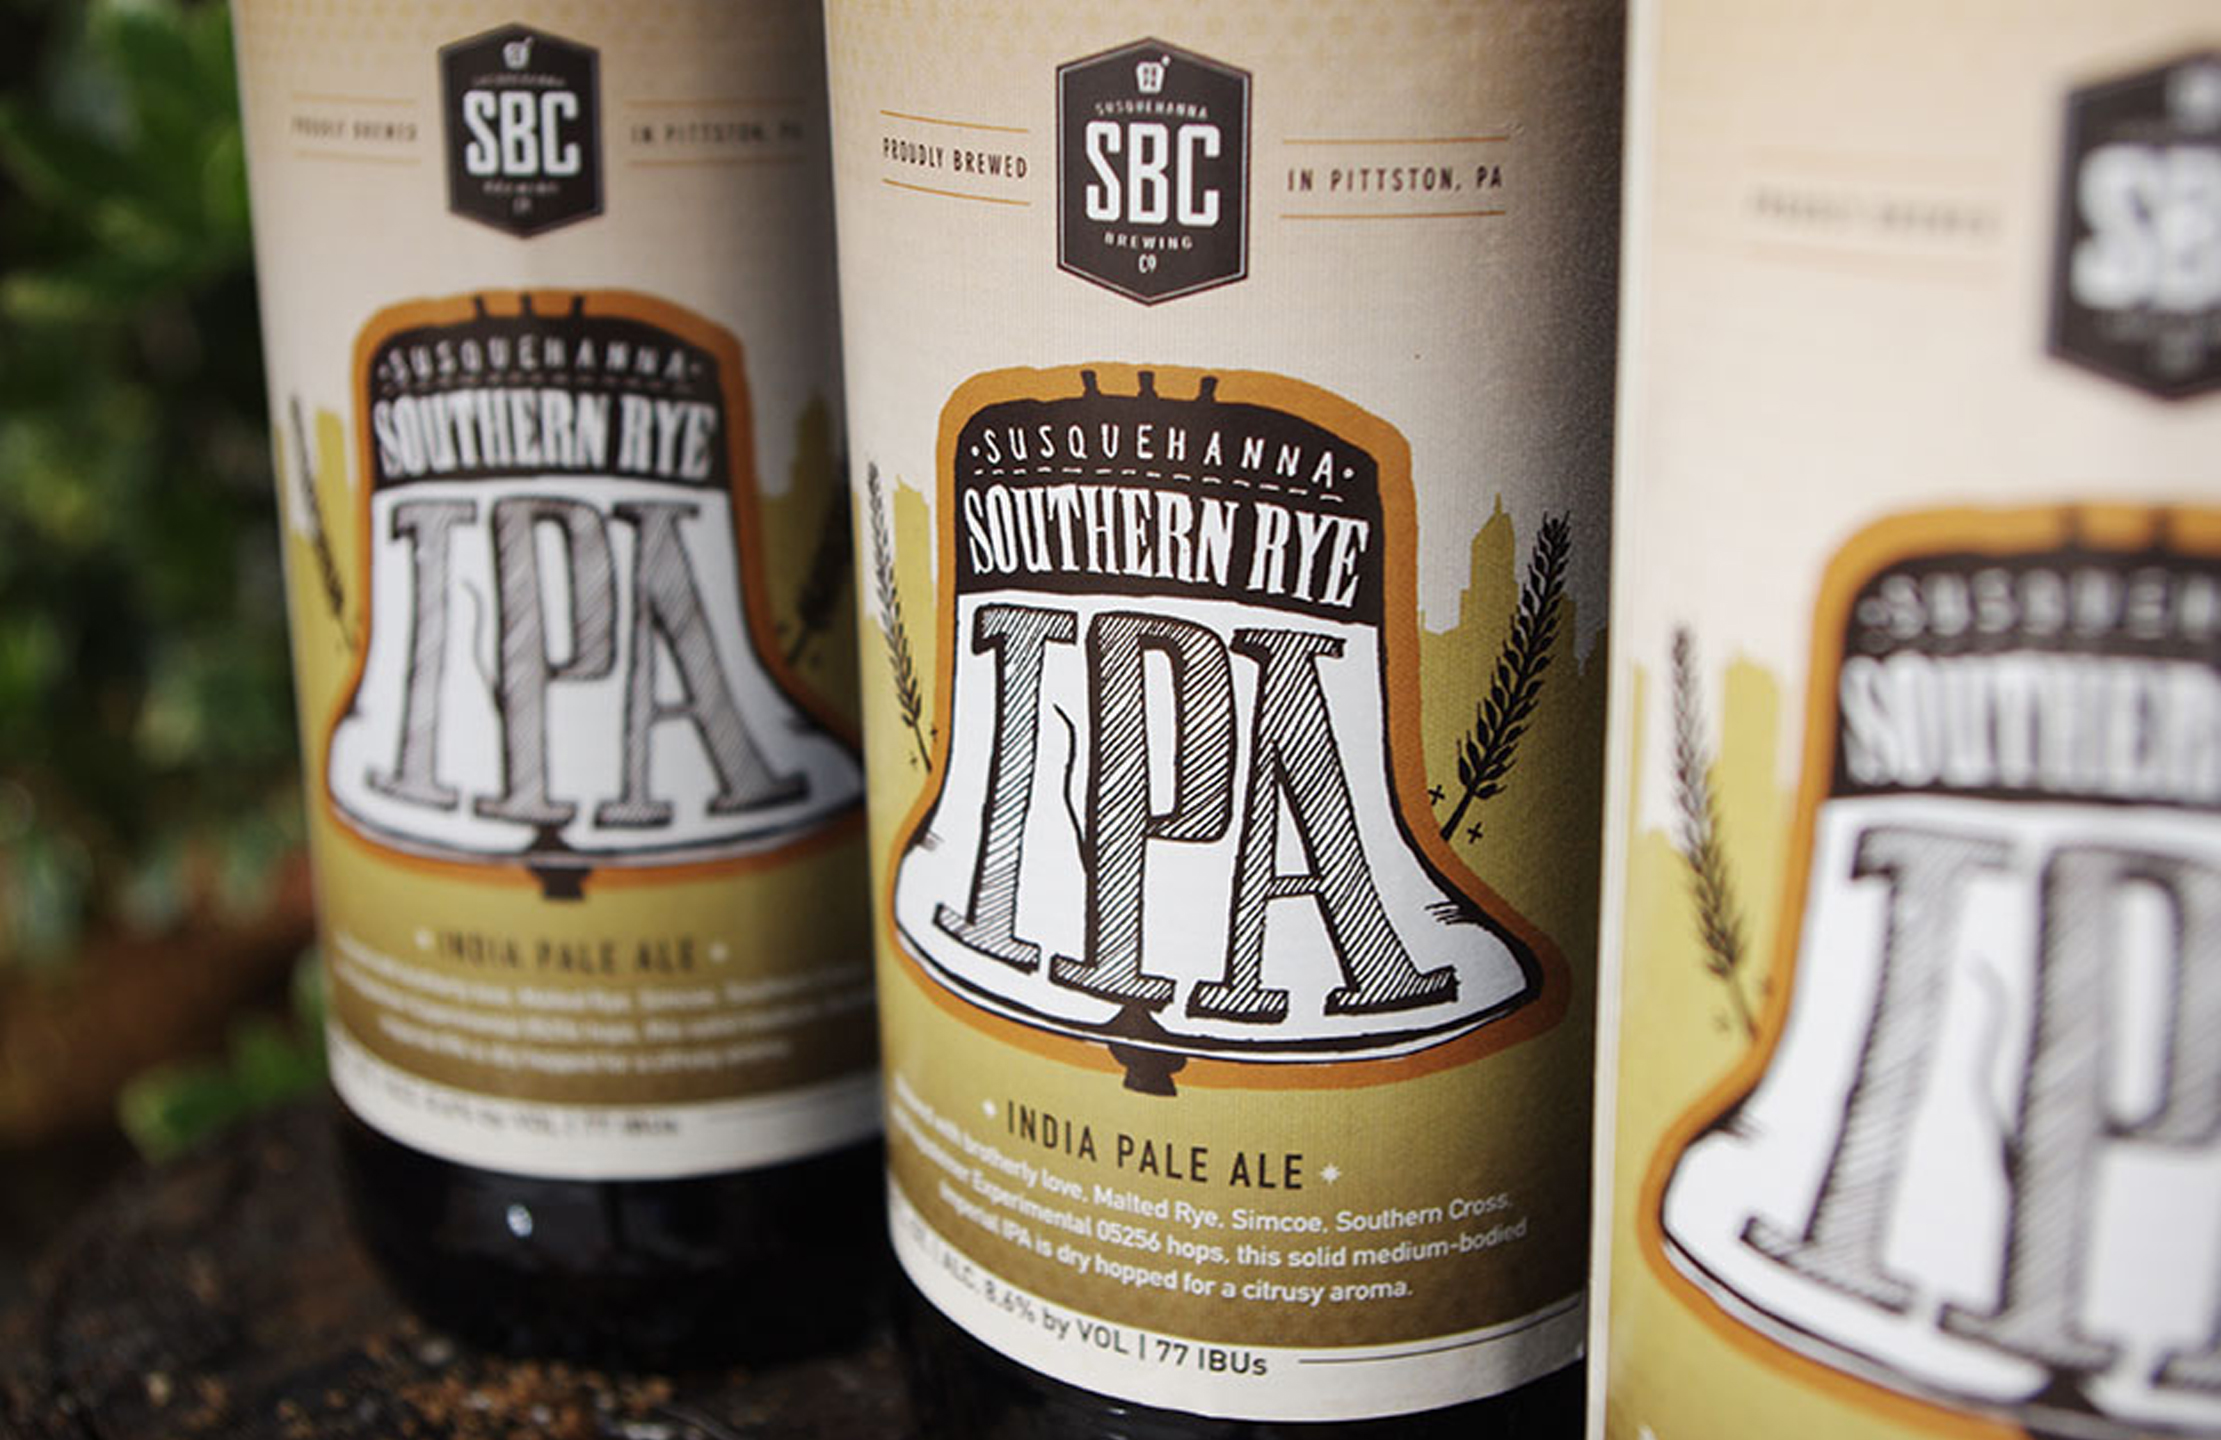 Susquehanna Breweing Co. Southern Rye IPA Brand by Just Make Things